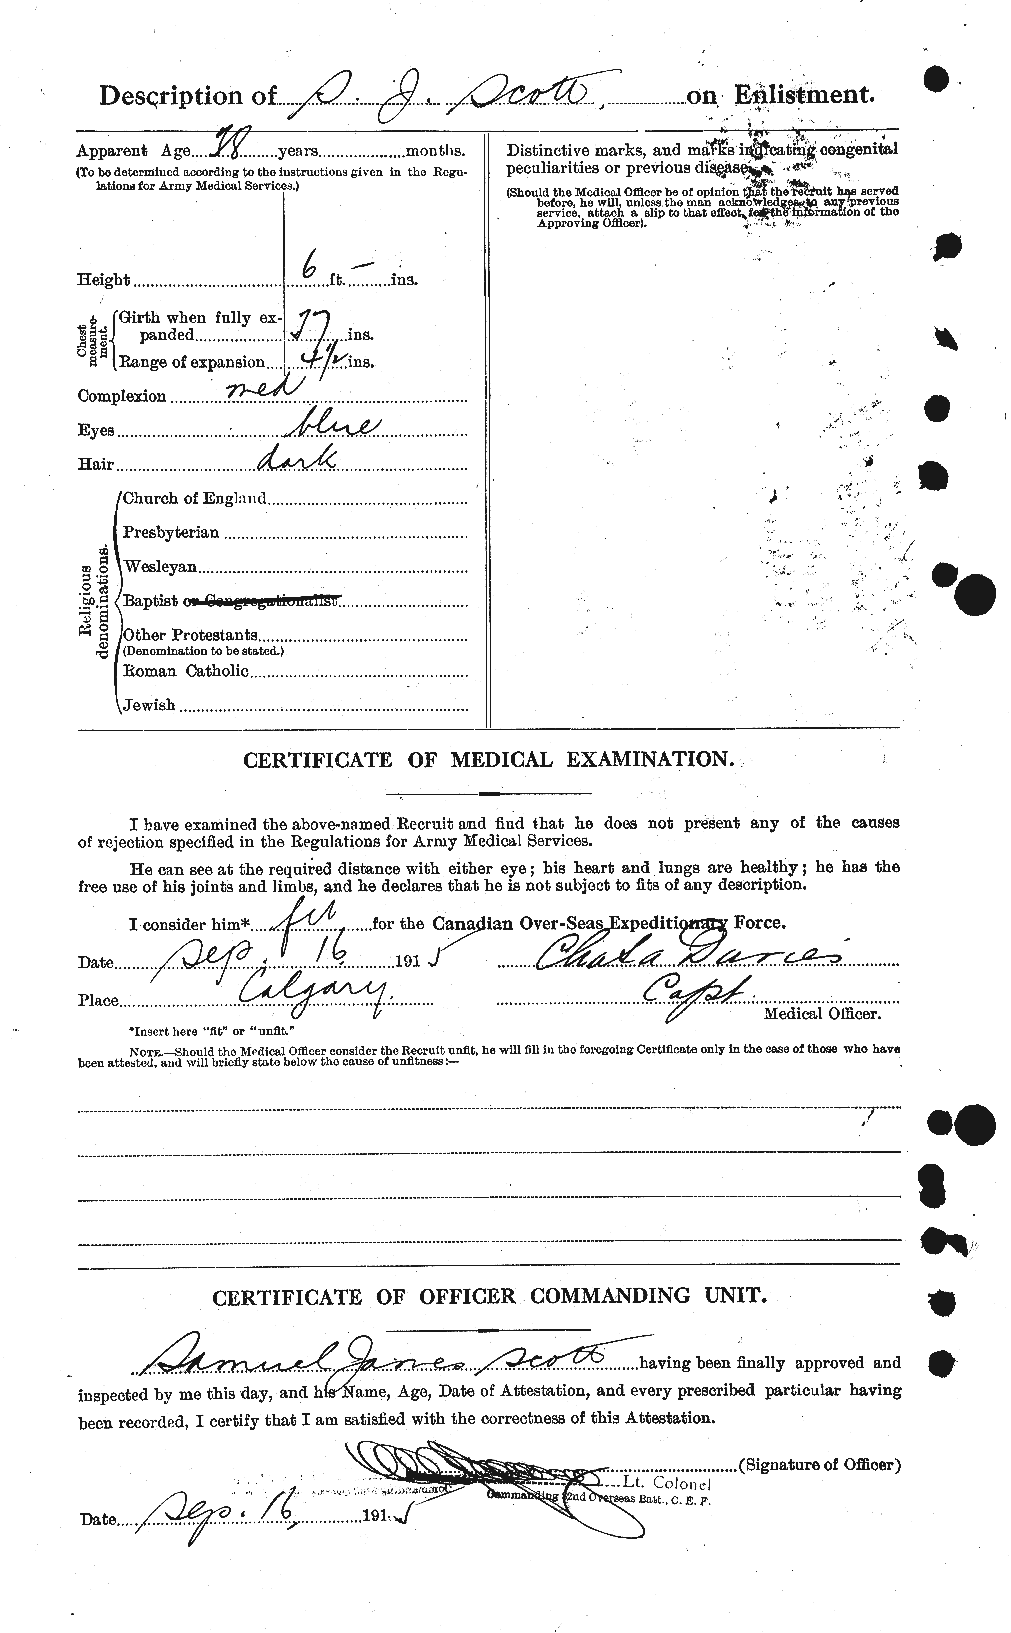 Personnel Records of the First World War - CEF 088858b